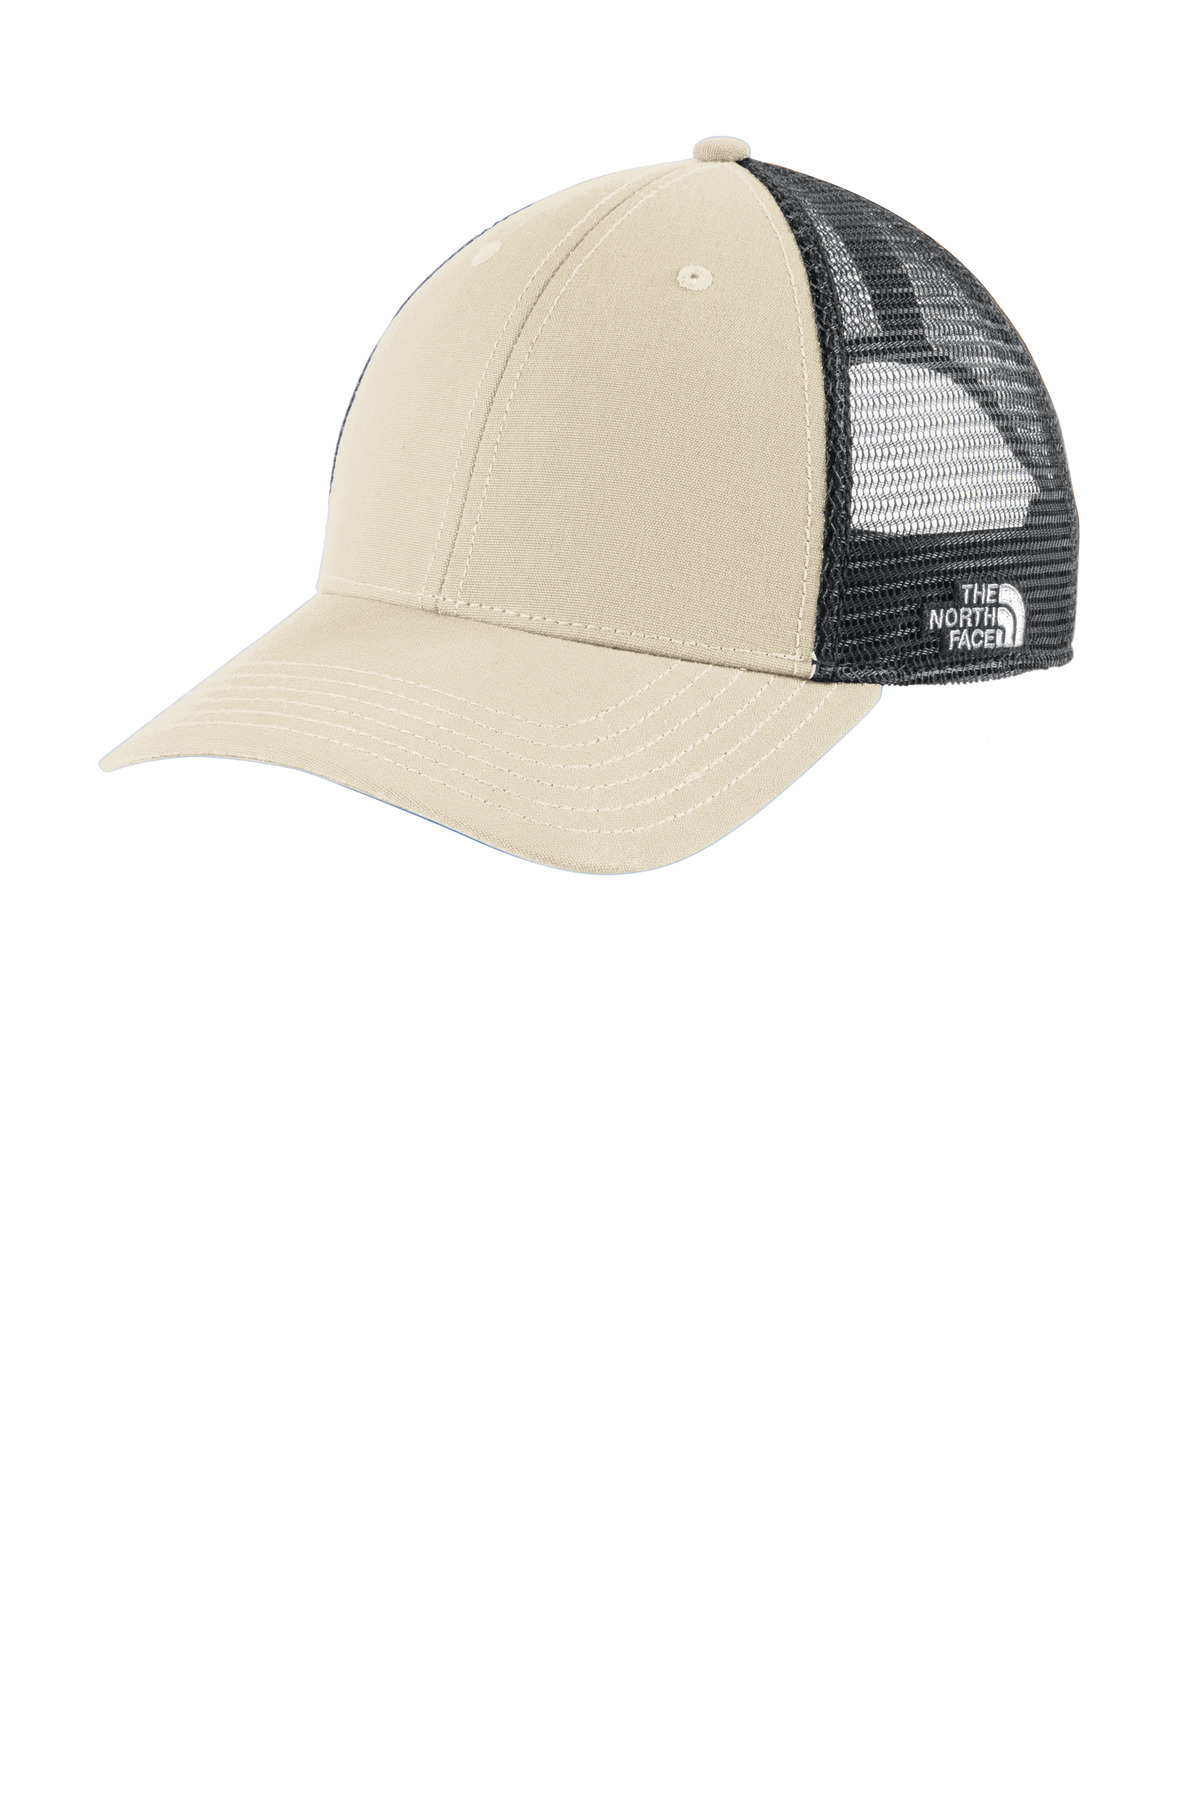 The North Face Ultimate Trucker Cap-The North Face